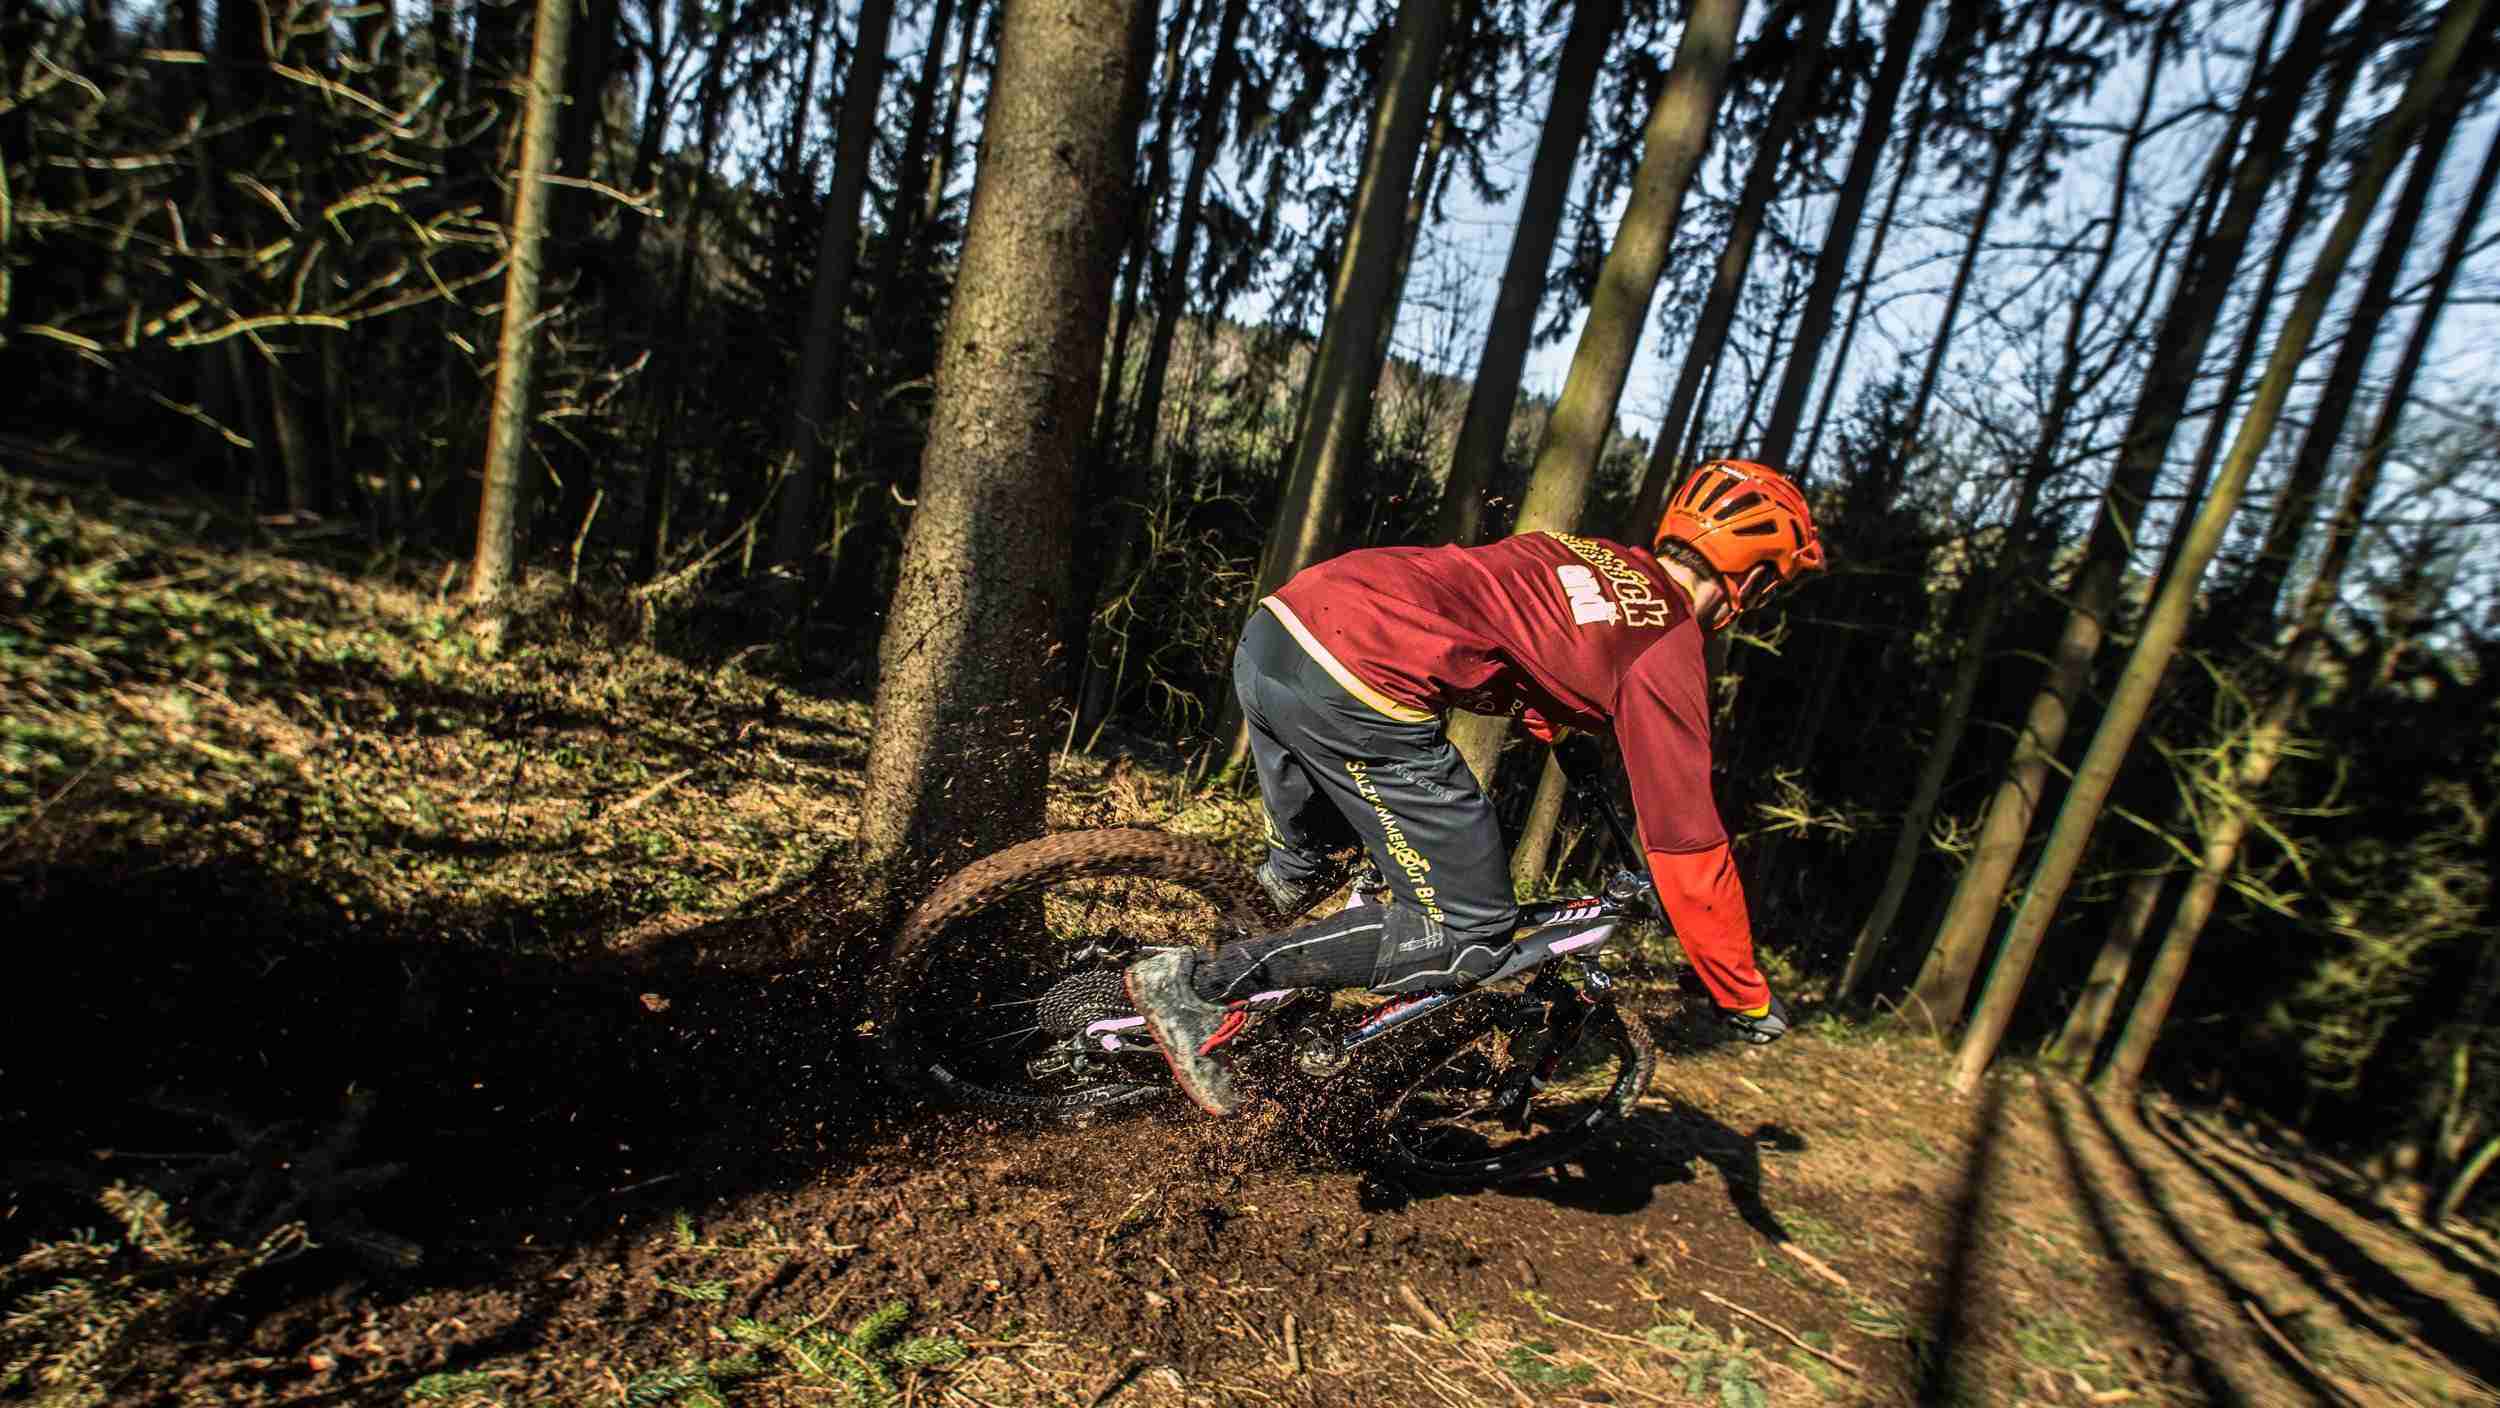 How To Prepare For Your First Enduro Mountain Bike Race